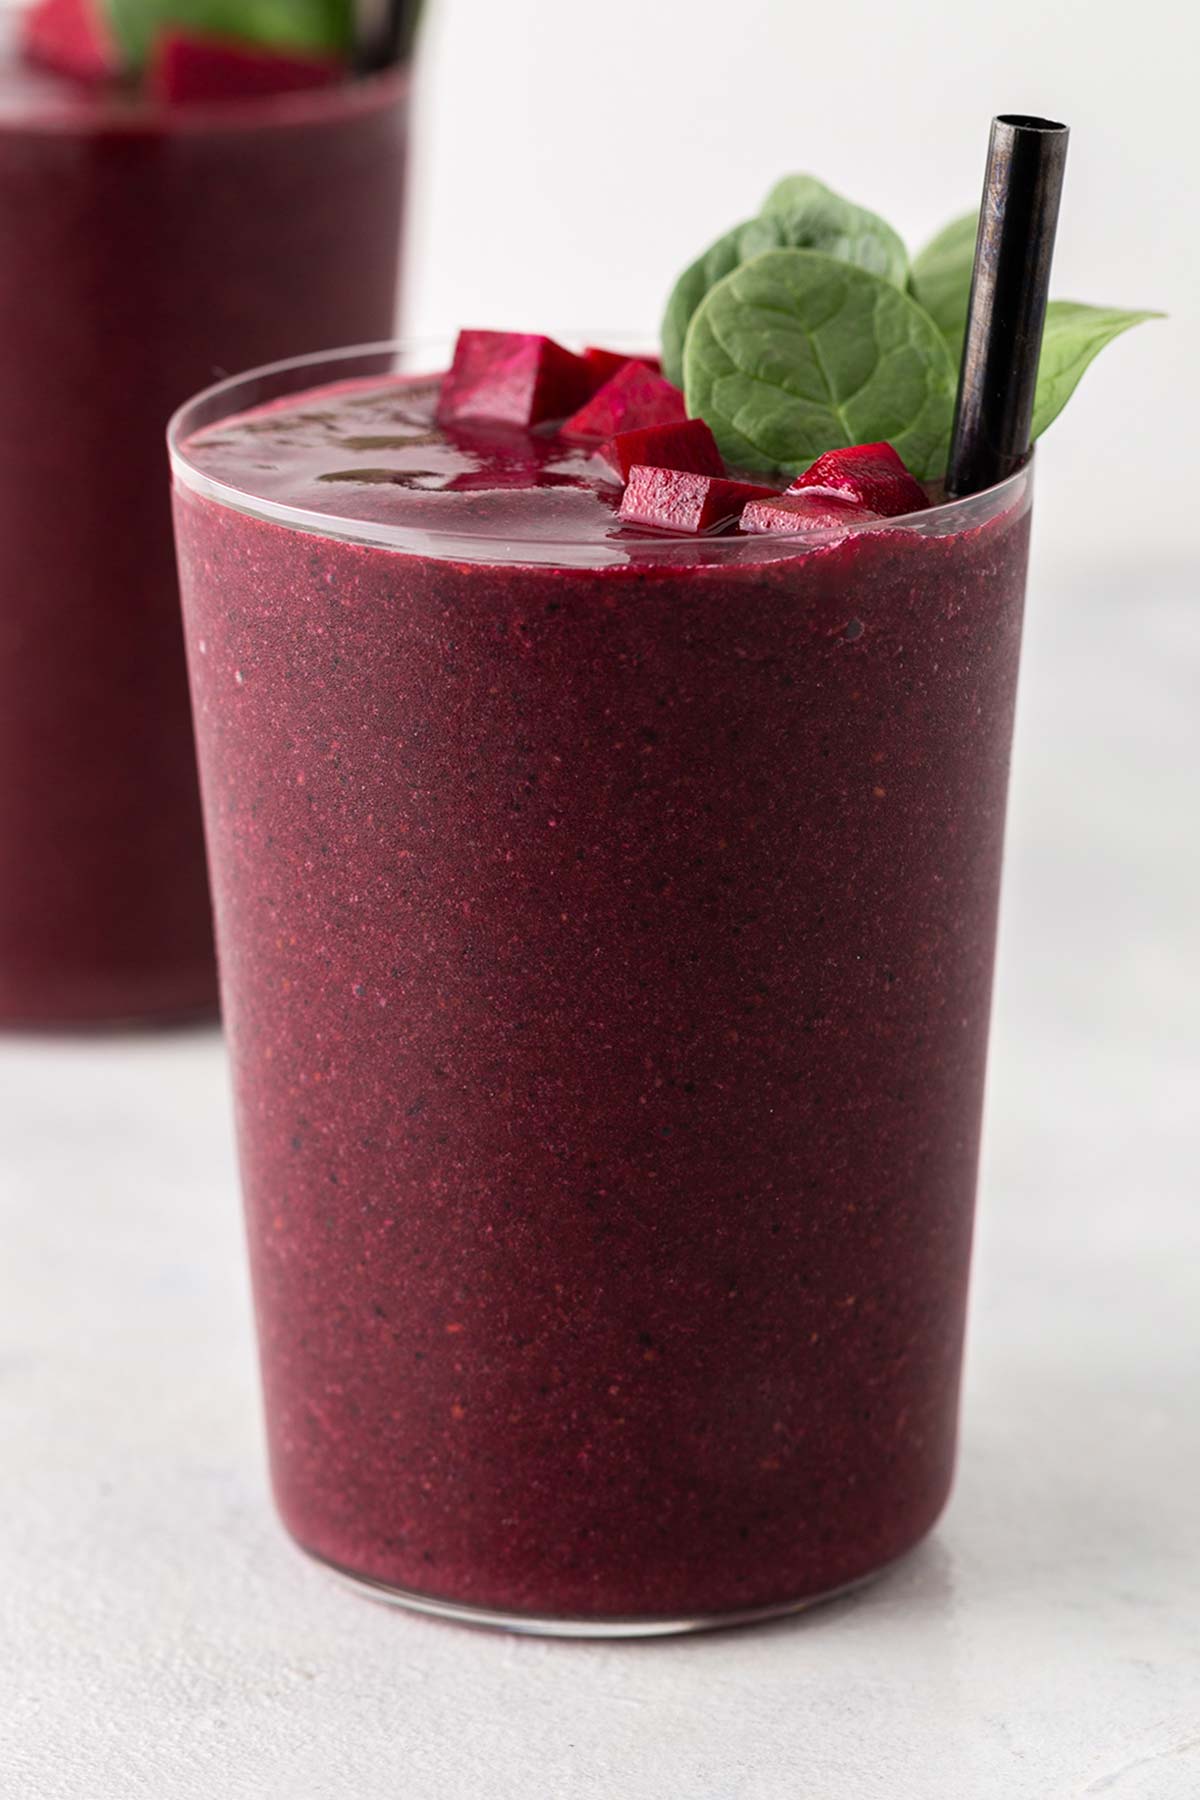 Beet smoothie in a glass.